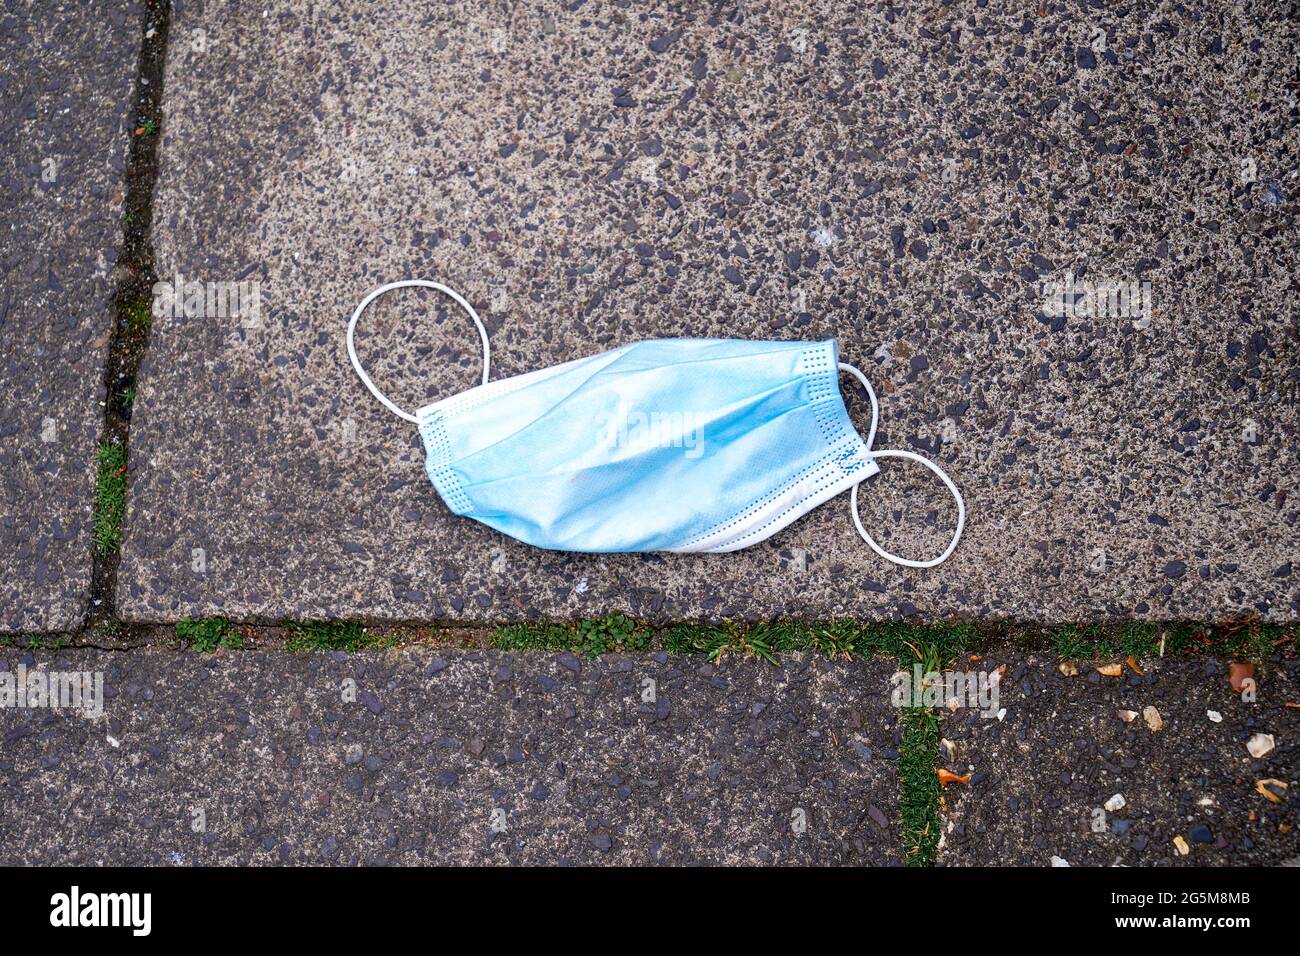 Discarded disposable face mask dropped on pavement Stock Photo